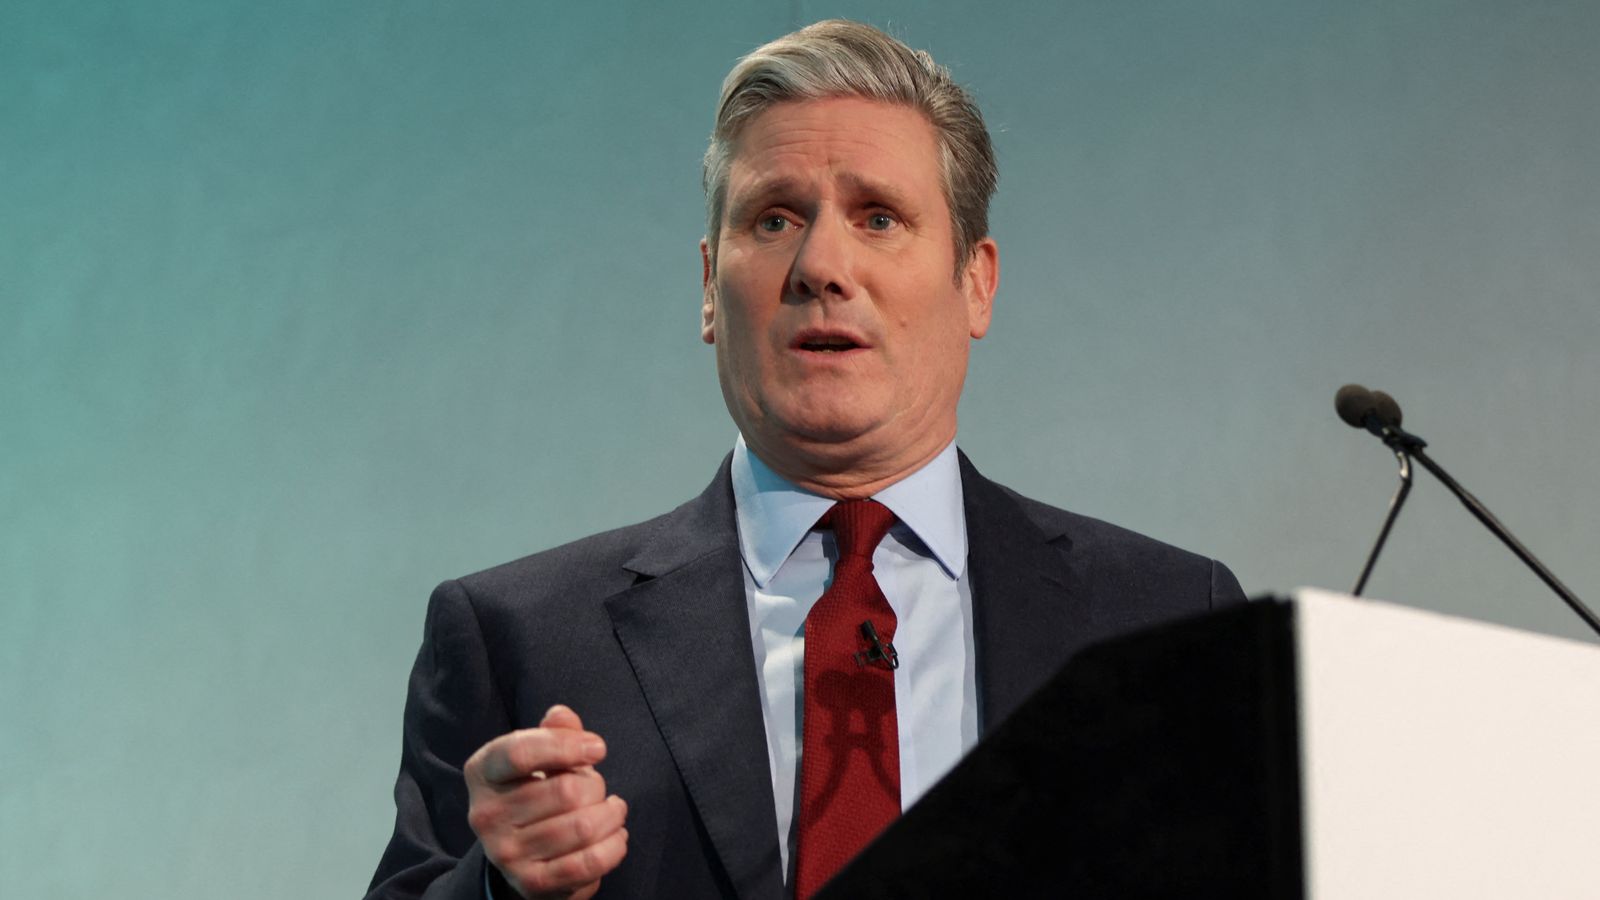 Sir Keir Starmer to launch election campaign with vow to change the 'character of politics'